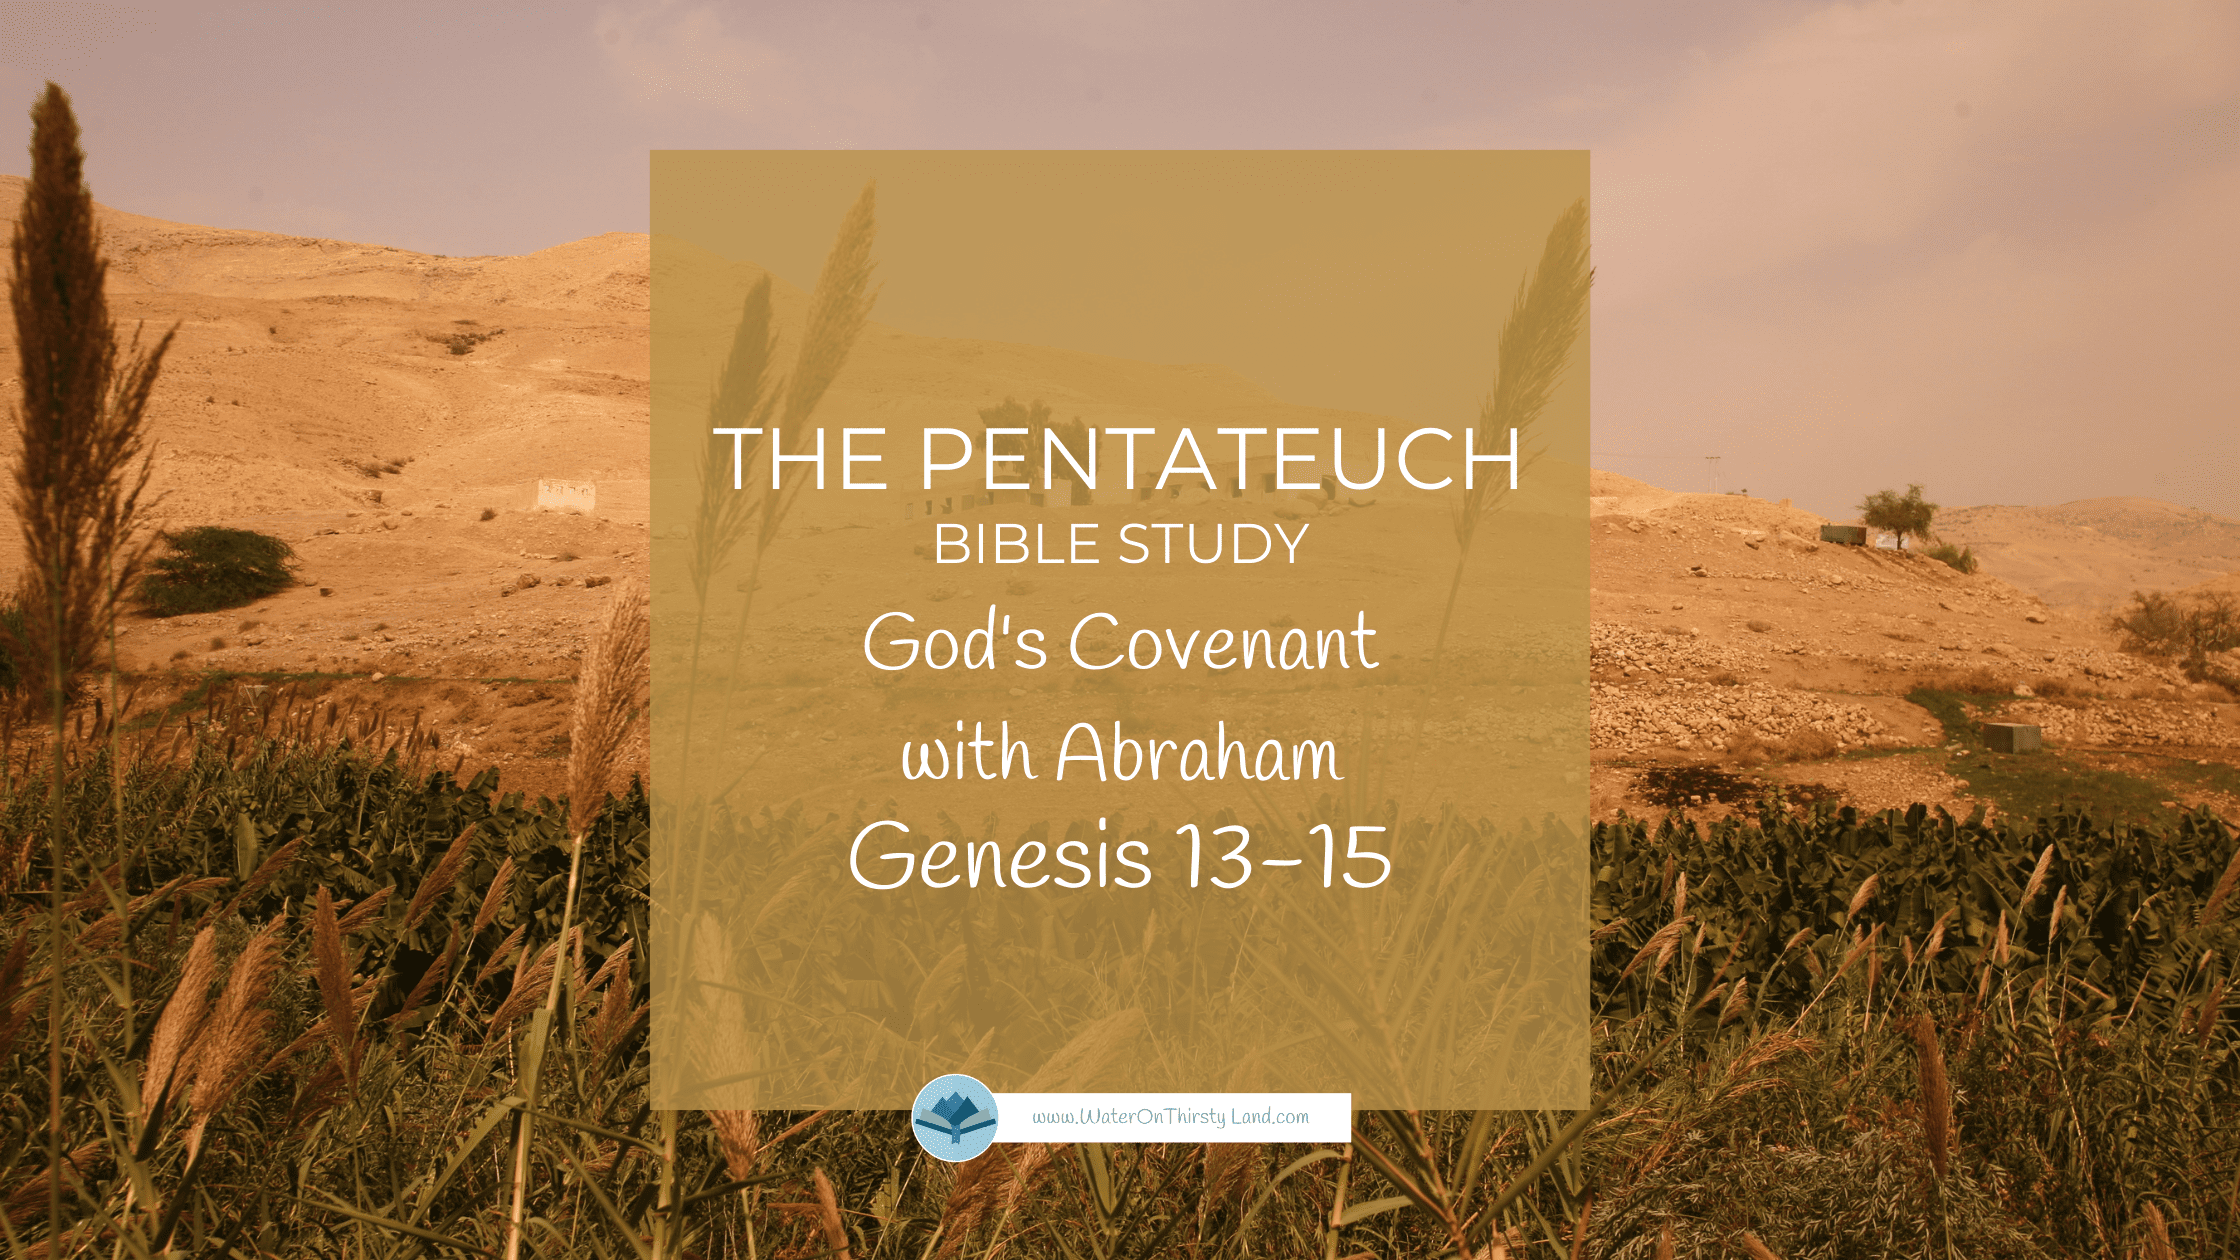 Pentateuch God's Covenant with Abraham Genesis 13-15 CK